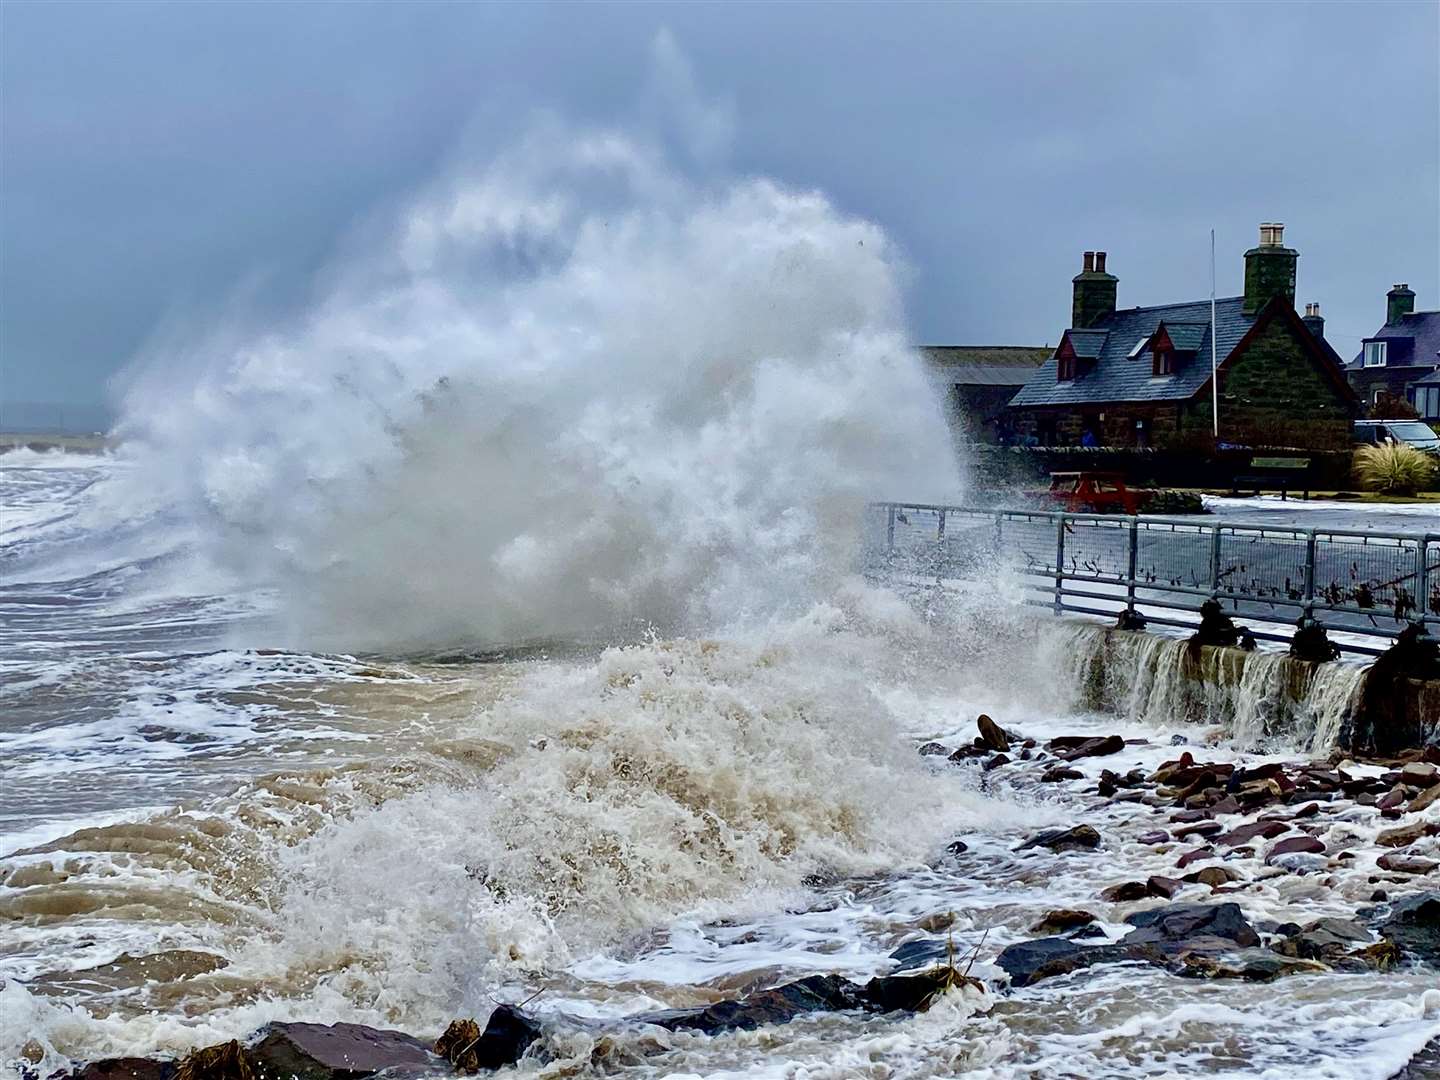 Barriers along the sea wall were completely flattened between the Seafront Centre and the Free Church of Scotland as huge waves lashed over the sea wall last month.